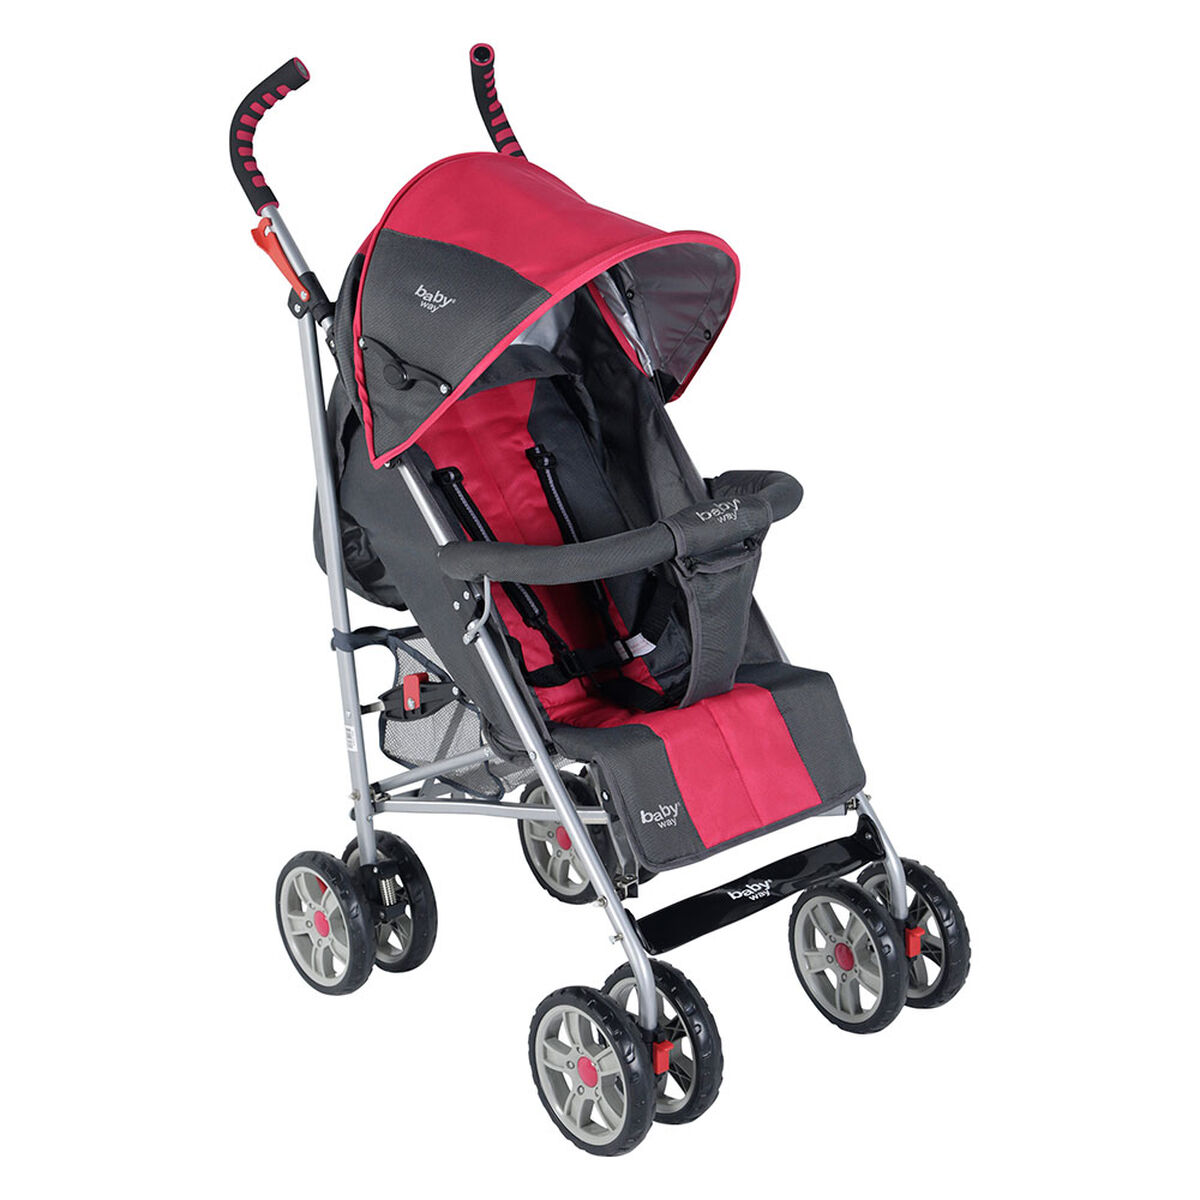 Coche Paragua Baby Way Bw-111T17 Fucsia